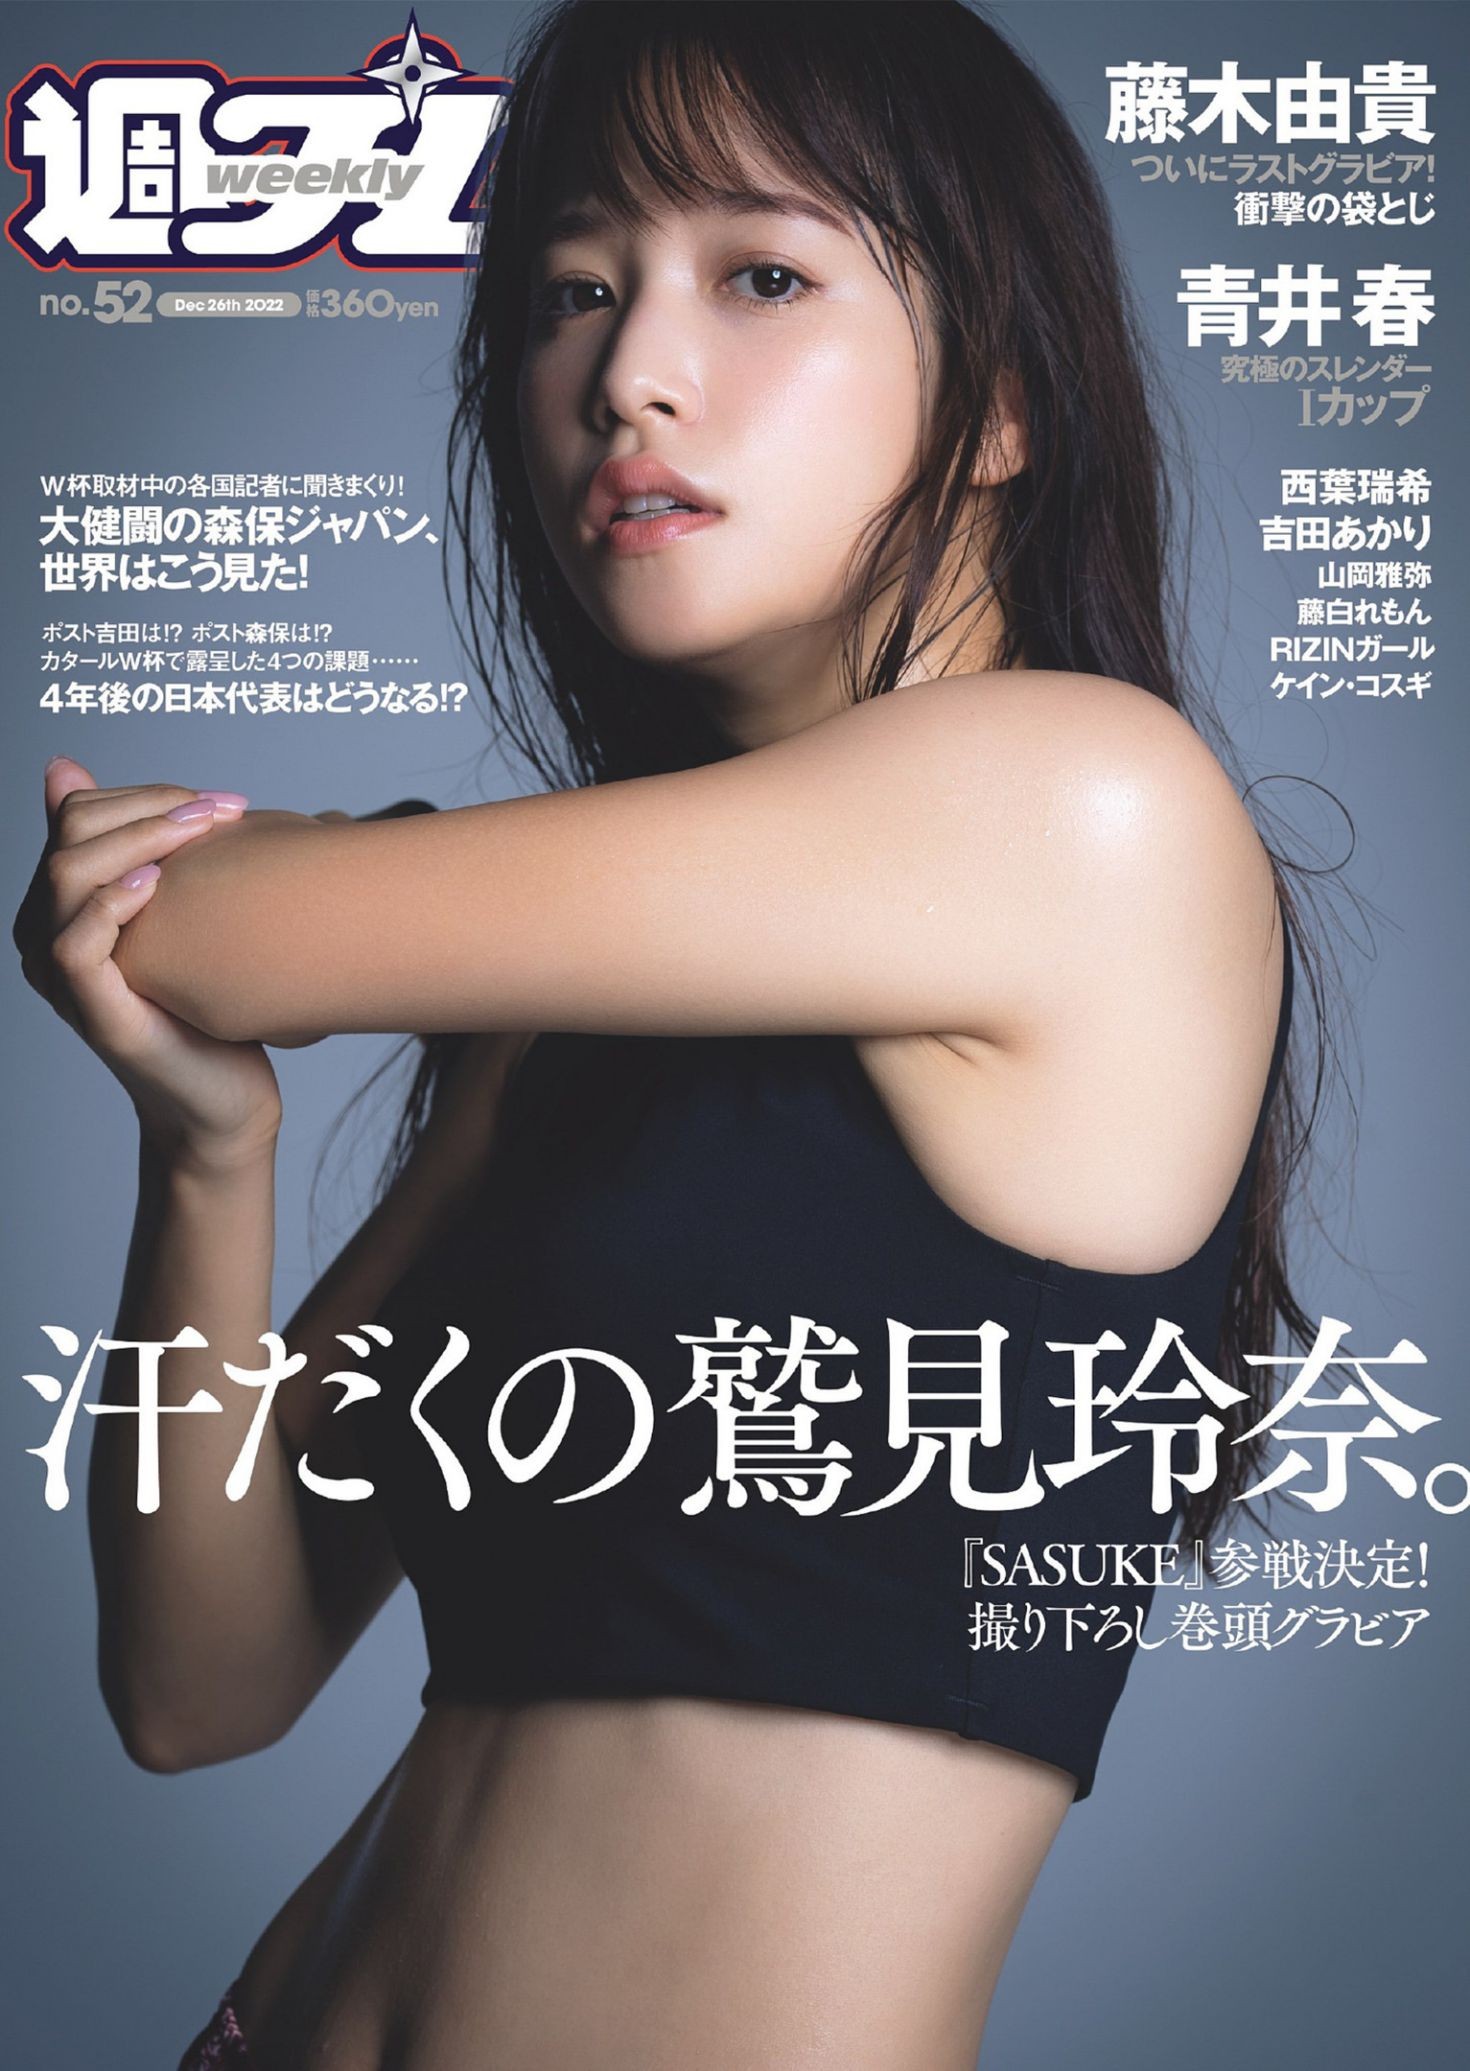 Weekly Playboy 2022 No.52 鷲見玲奈 西葉瑞希 青井春 吉田あかり 山岡雅弥 藤白れもん 藤木由貴 (2)